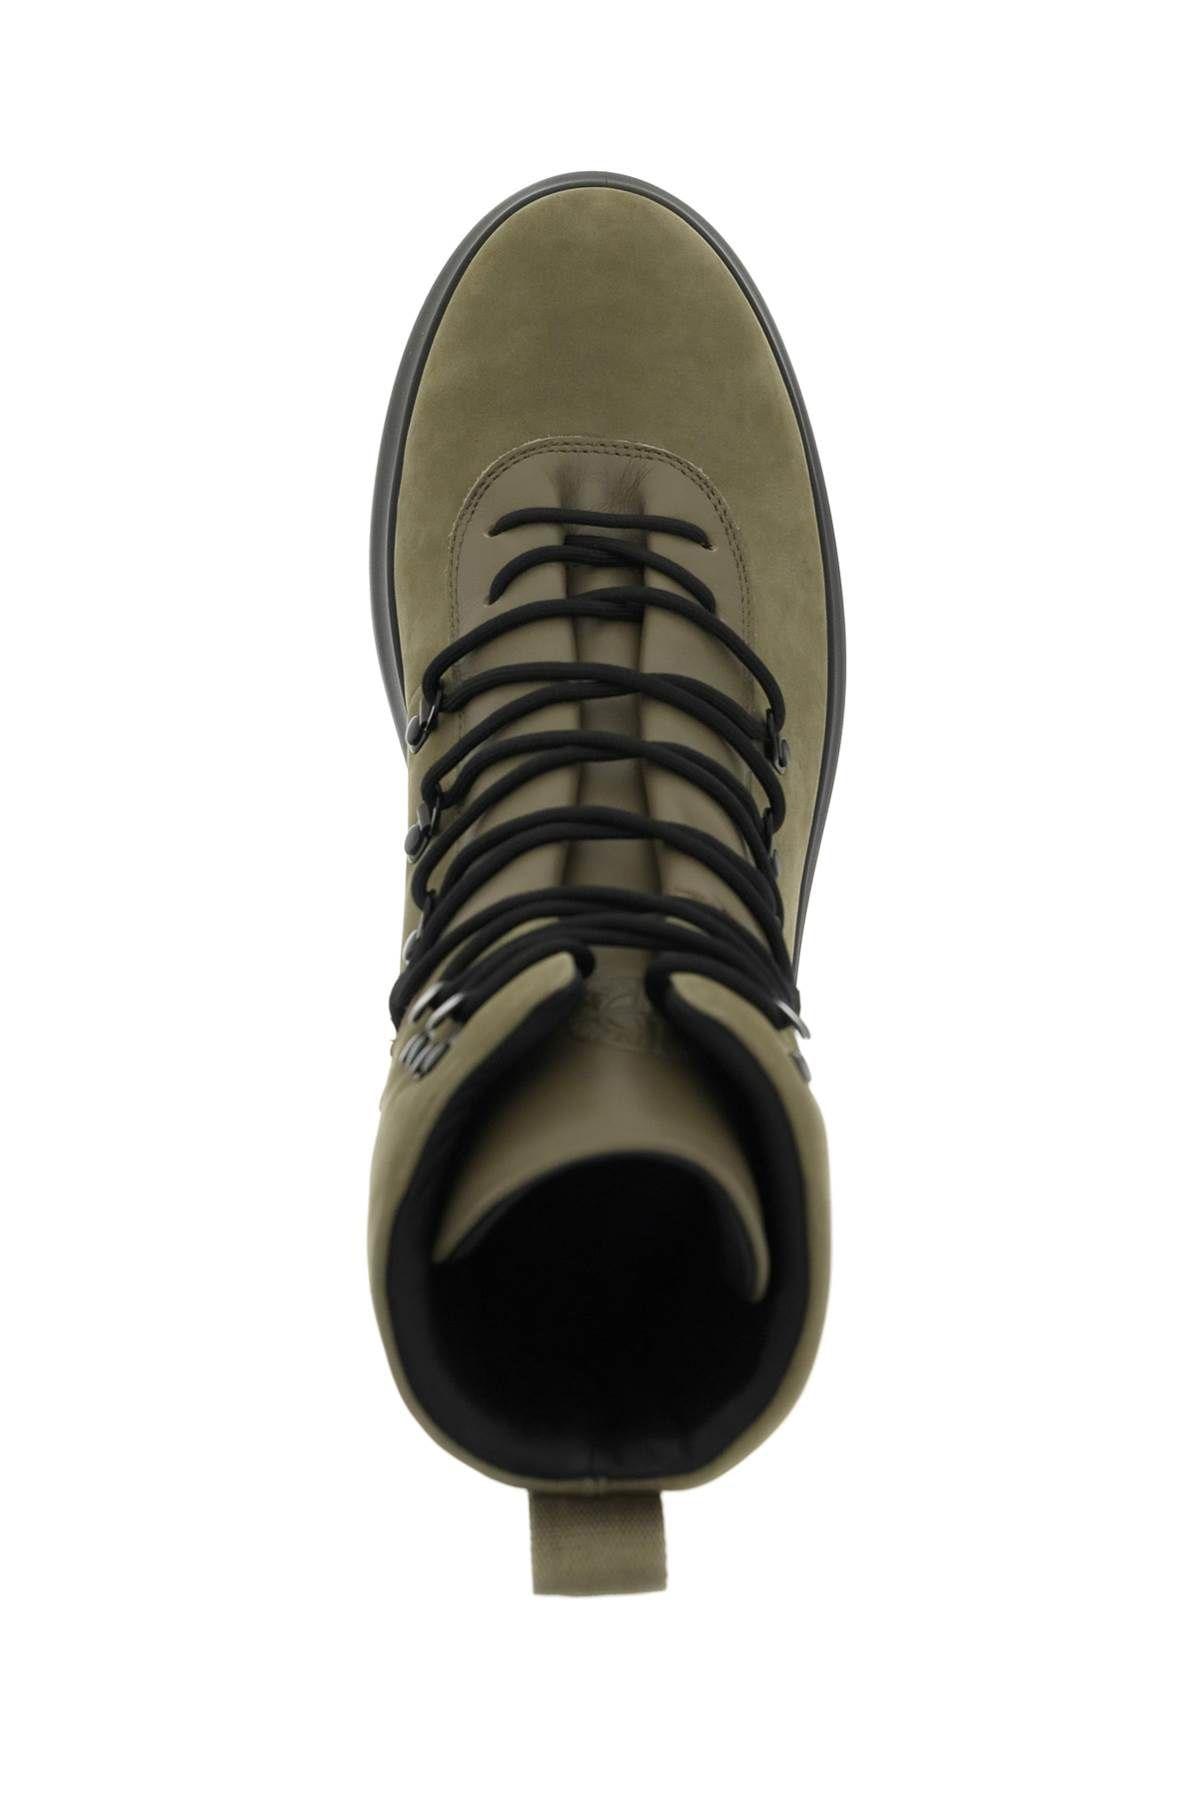 Shop Stone Island Suede Leather Lace-up Ankle Boots